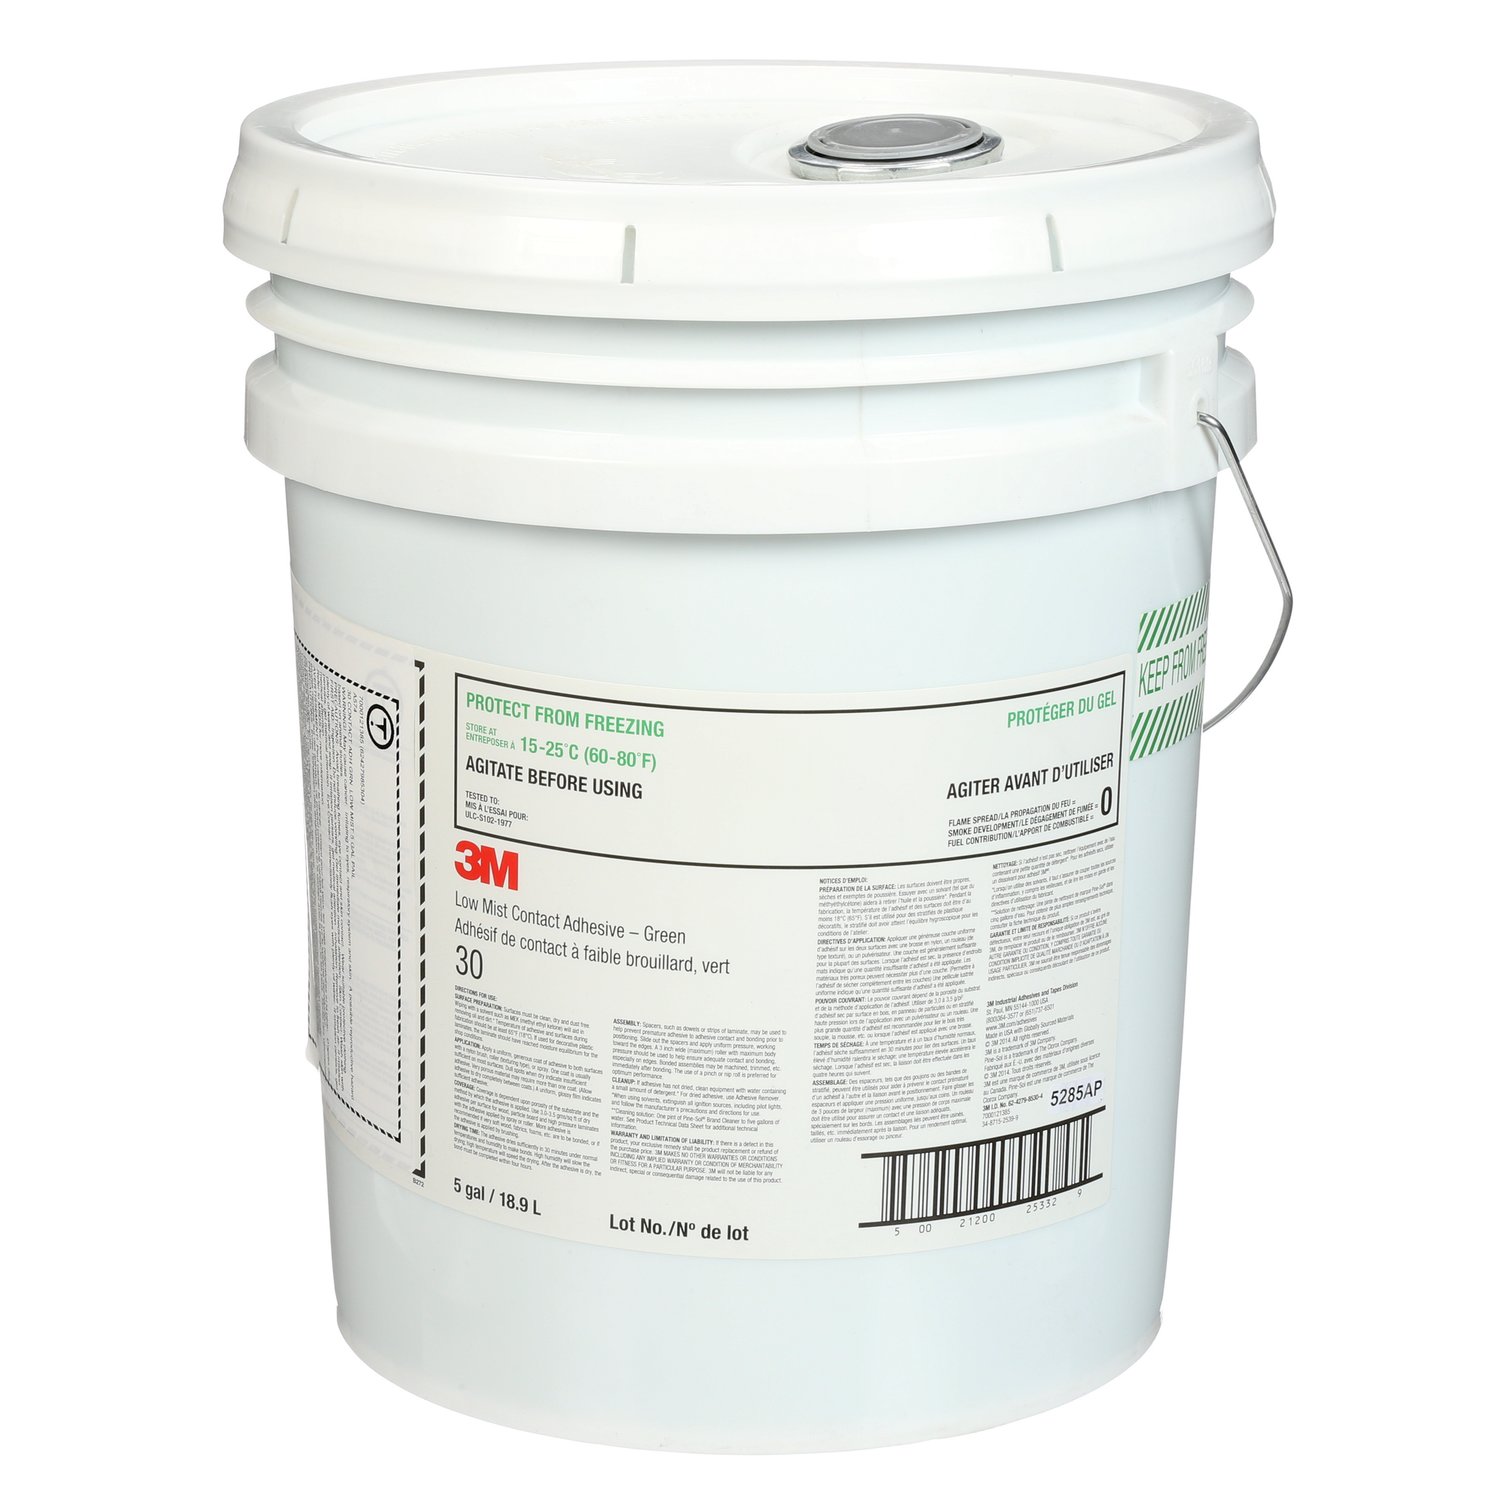 7000121385 - 3M Low Mist Contact Adhesive, Green, 5 Gallon Drum (Pail)